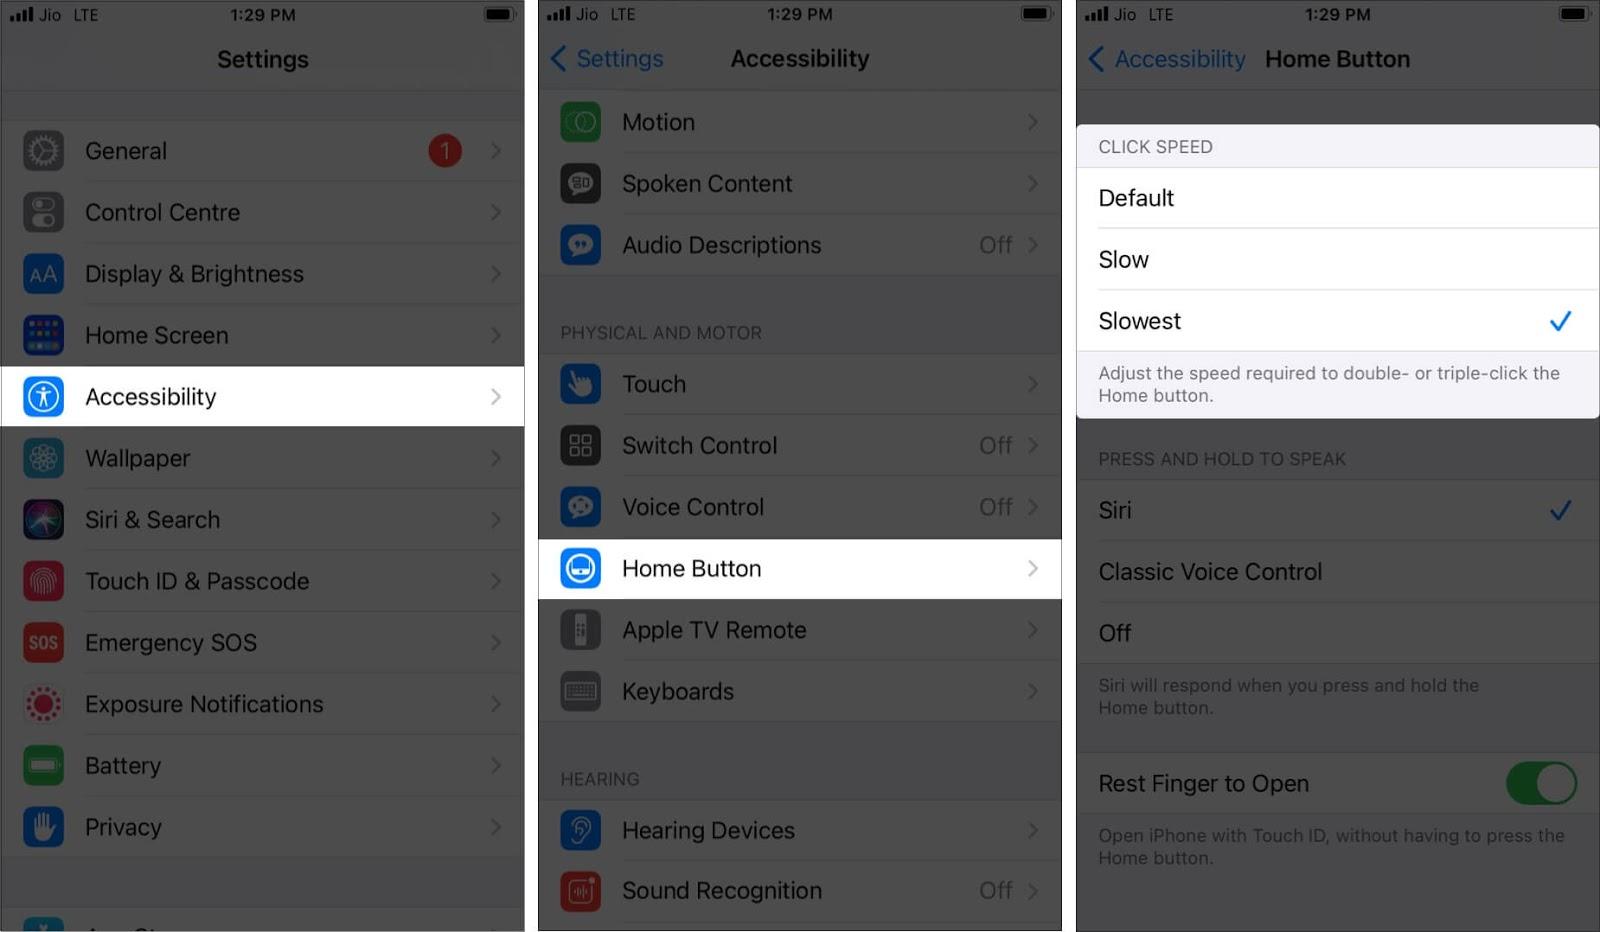 How to adjust the iPhone Home button click speed